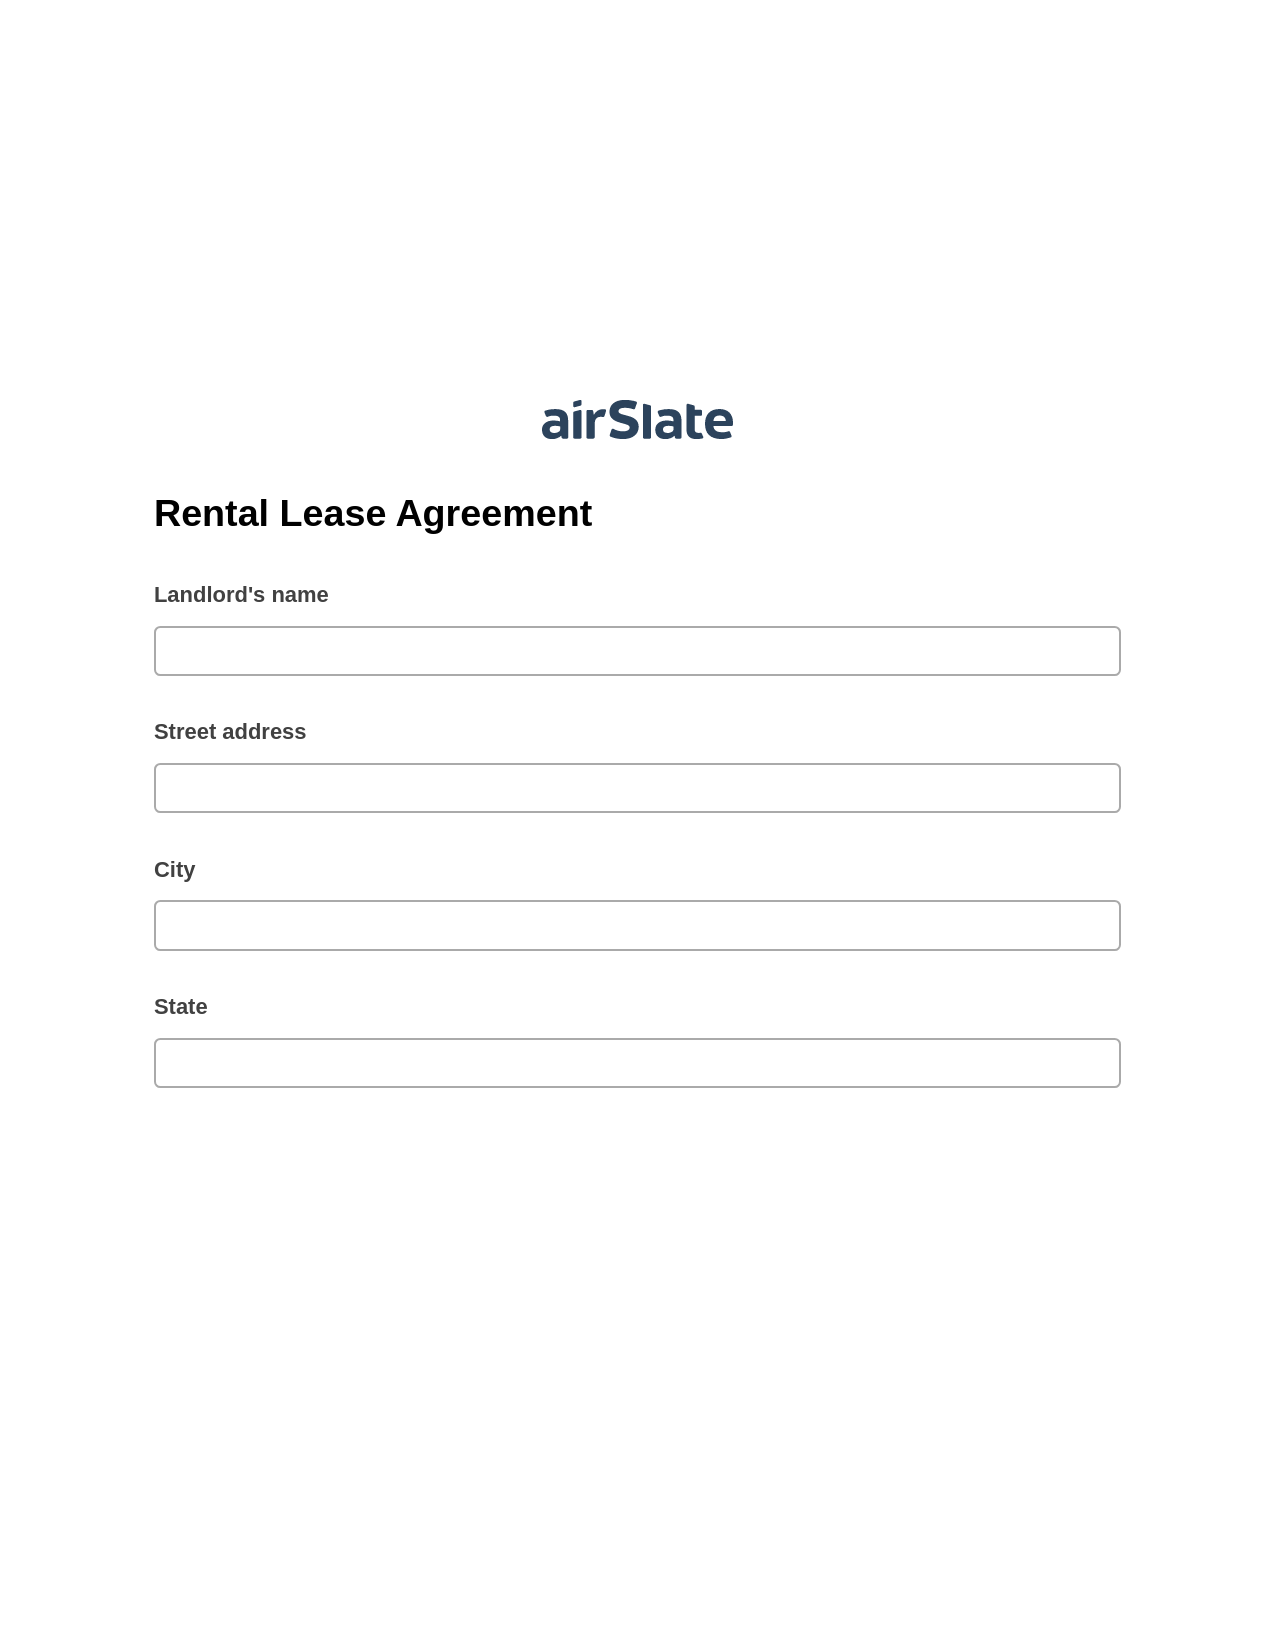 Rental Lease Agreement Pre-fill from Salesforce Records with SOQL Bot, Update MS Dynamics 365 Record Bot, Export to MySQL Bot